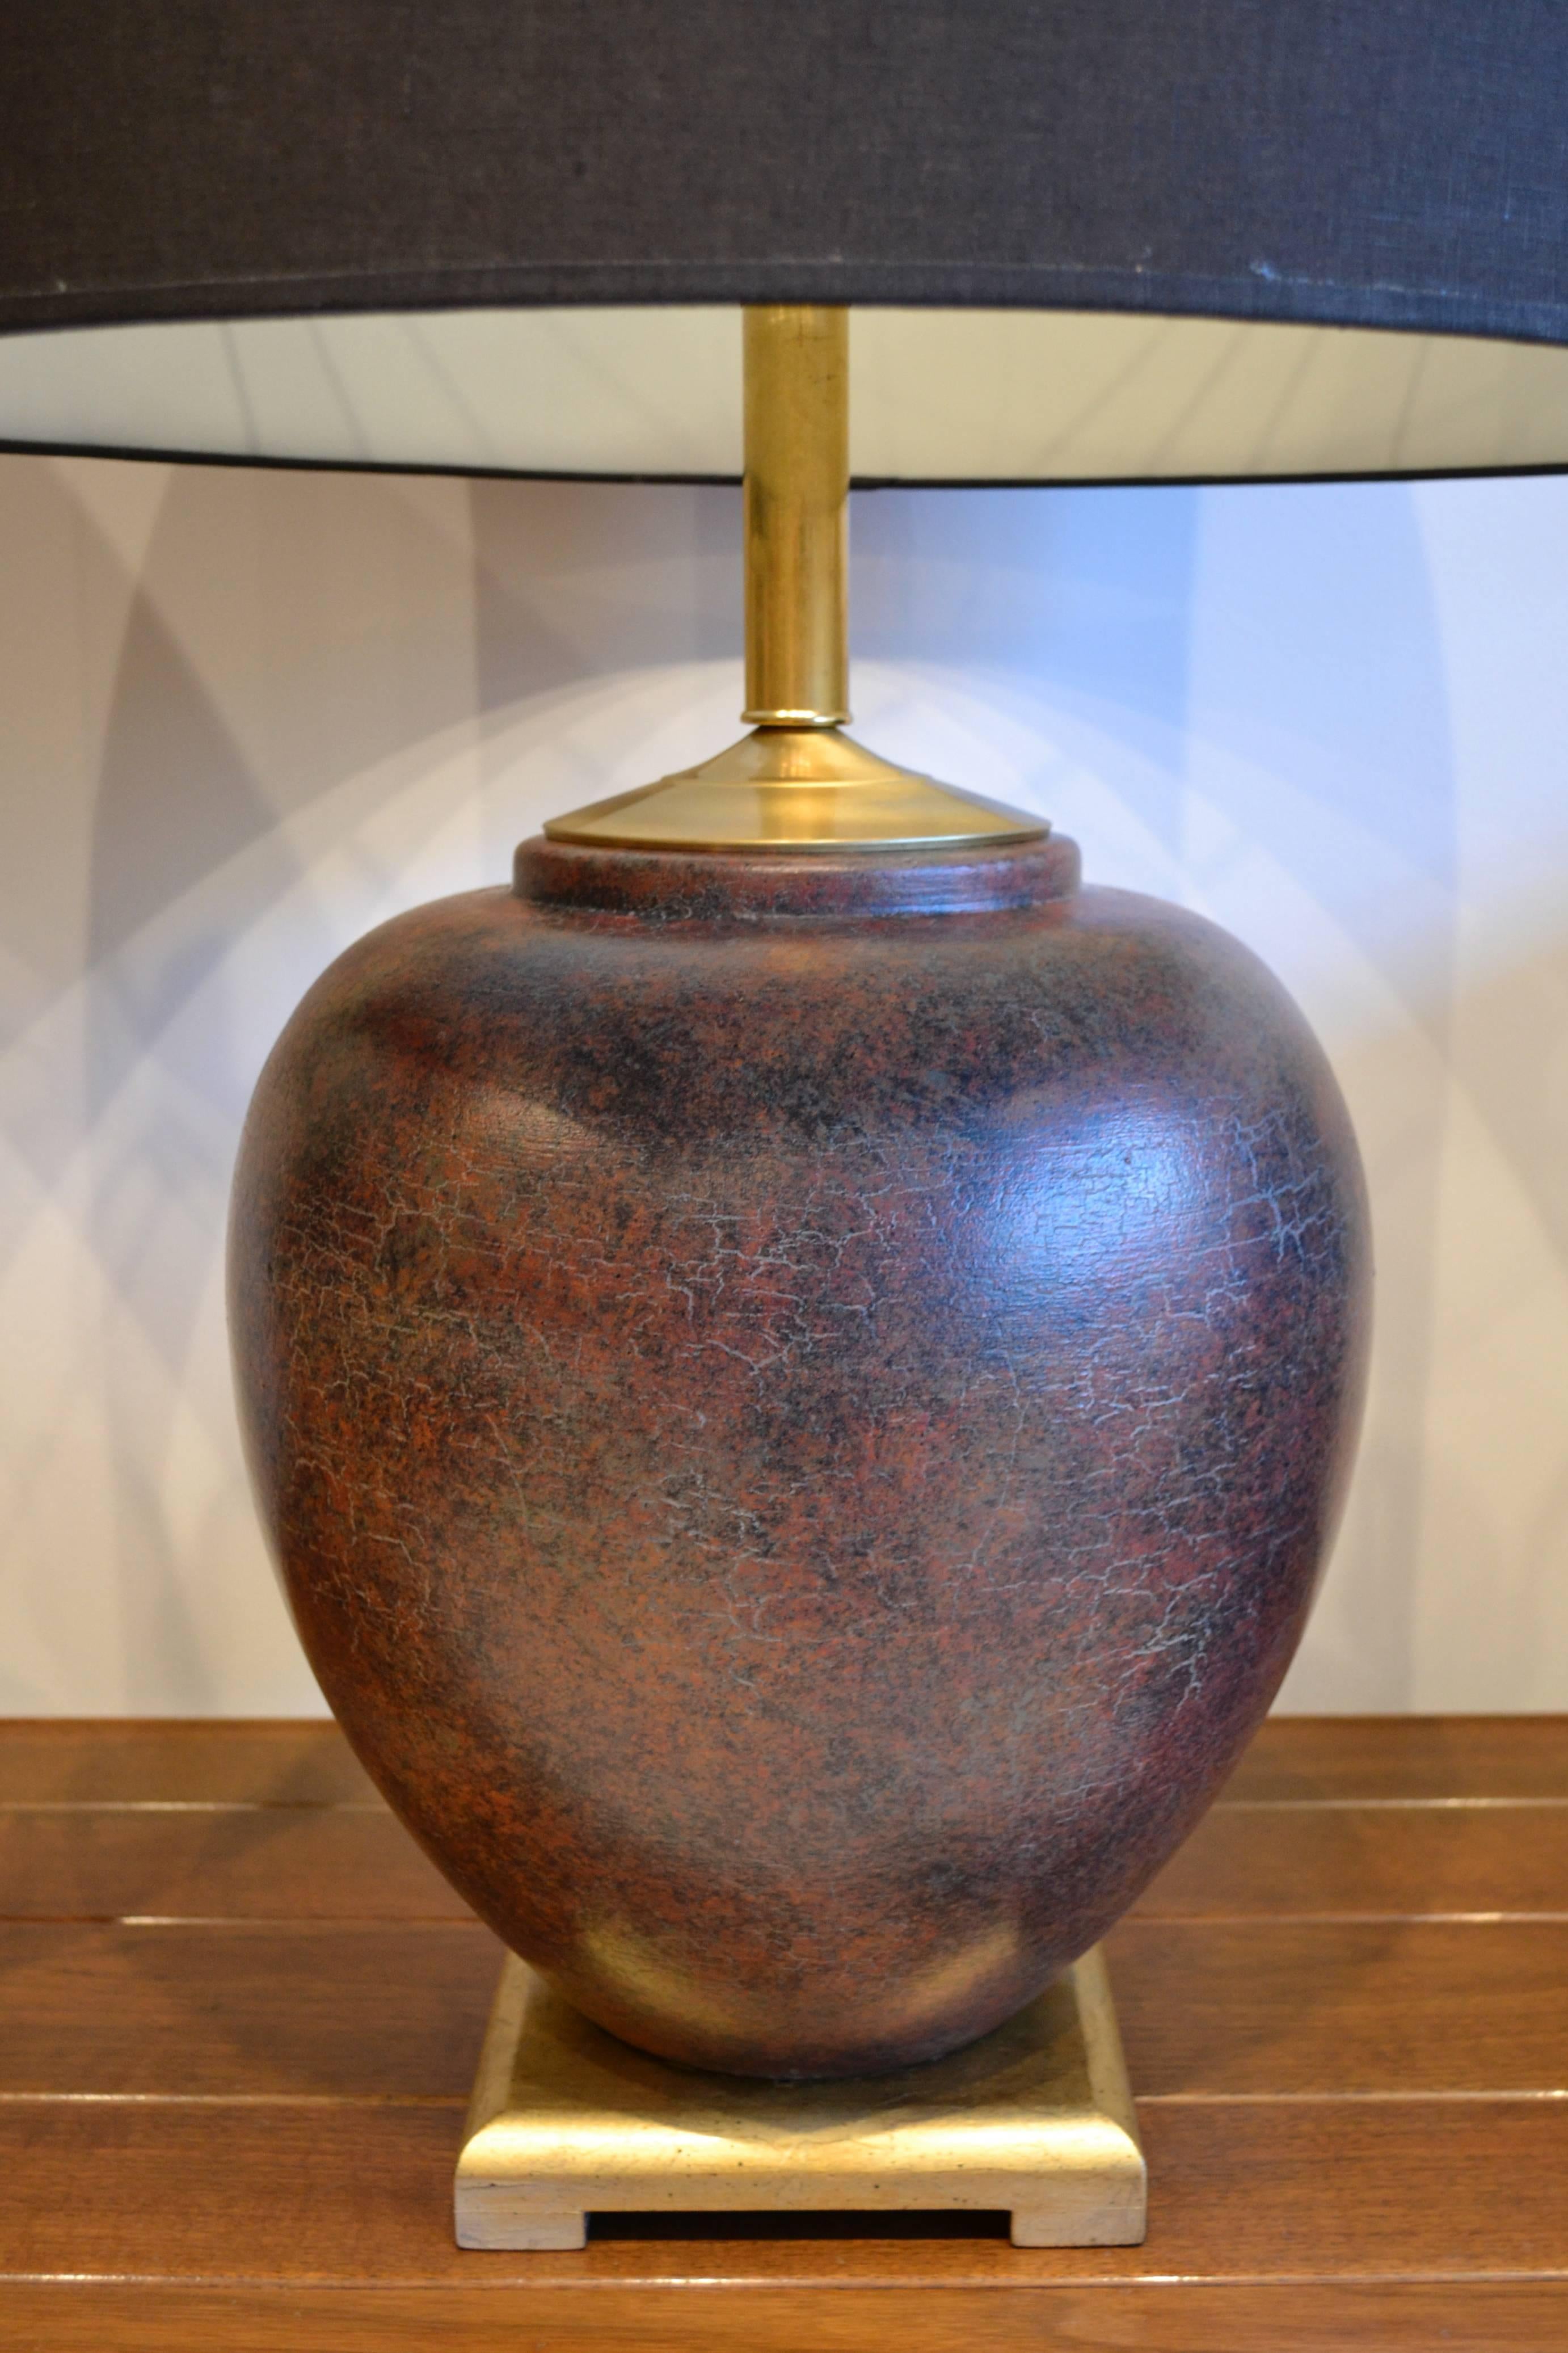 Very large pair of Asian ceramic table lamps with all solid brass components. Burnt rust color ceramic ginger jar mounted on gilded wooden bases. Stunning. See close-ups for color. Very similar to the work of James Mont.